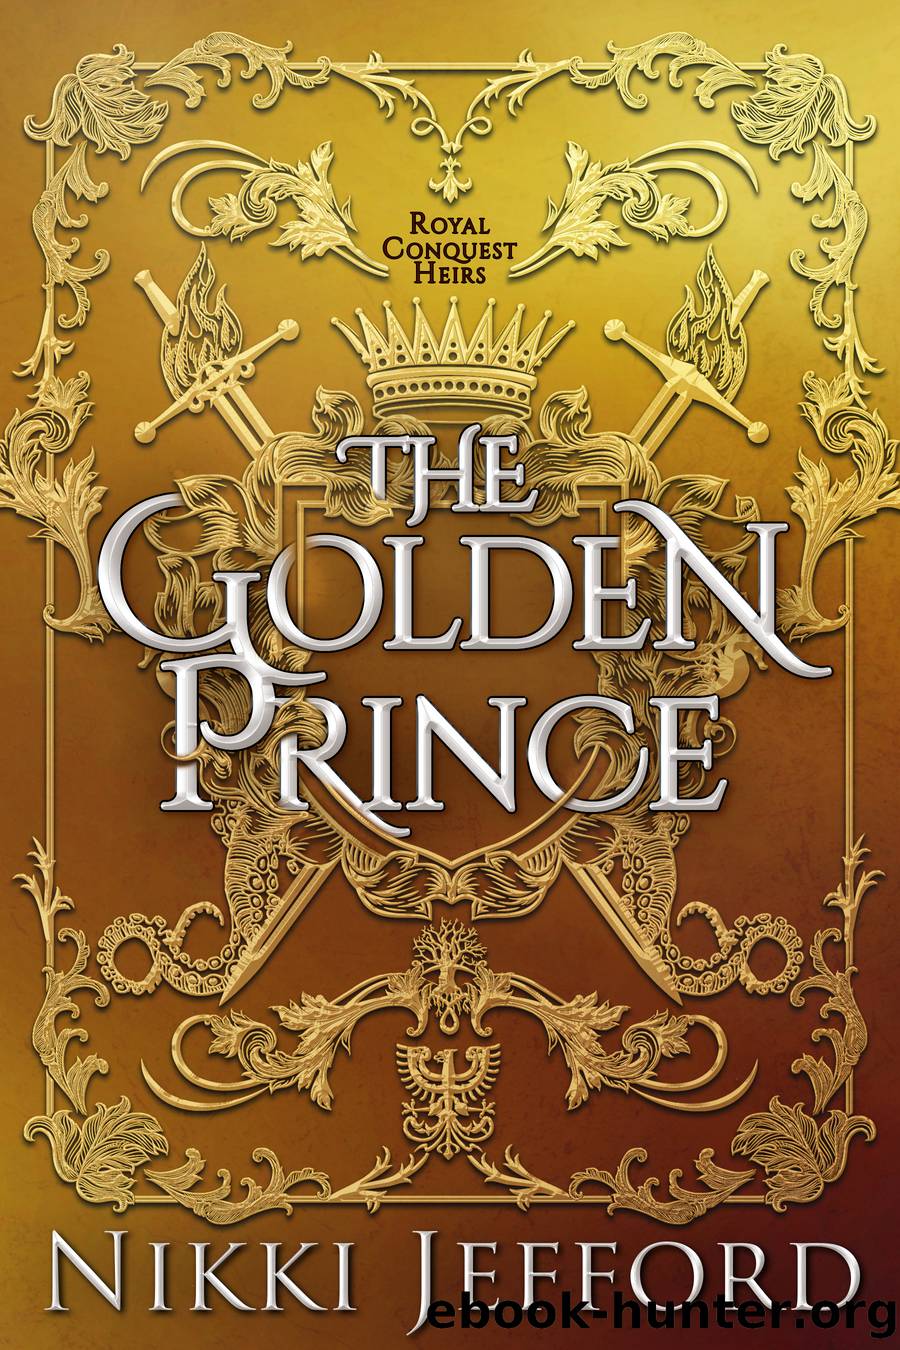 The Golden Prince by Nikki Jefford